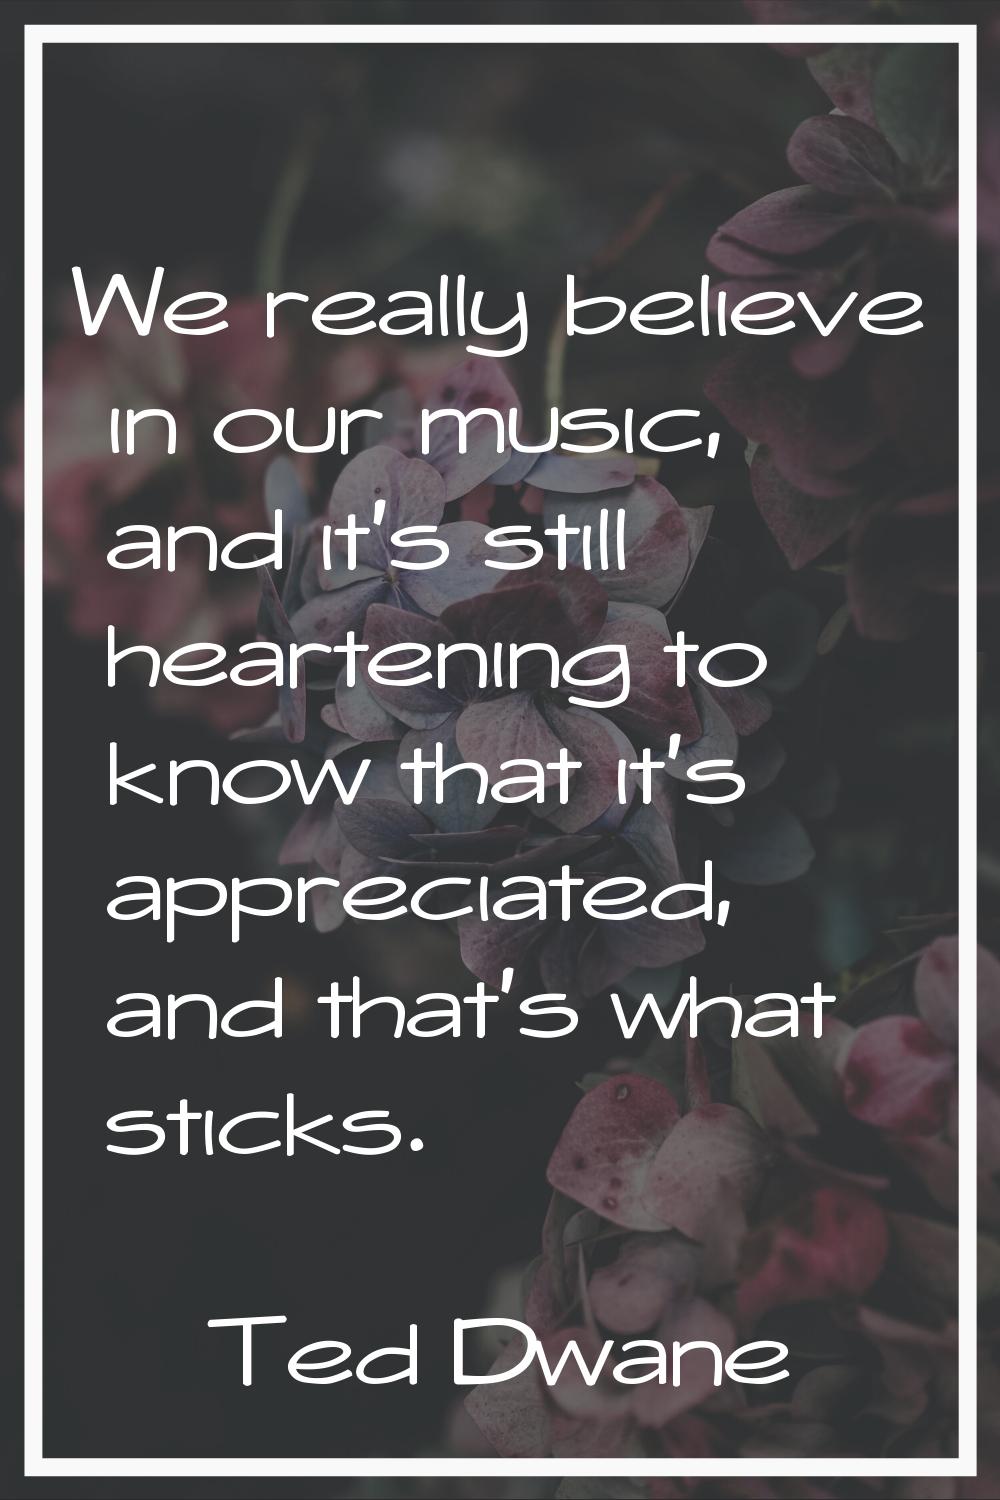 We really believe in our music, and it's still heartening to know that it's appreciated, and that's